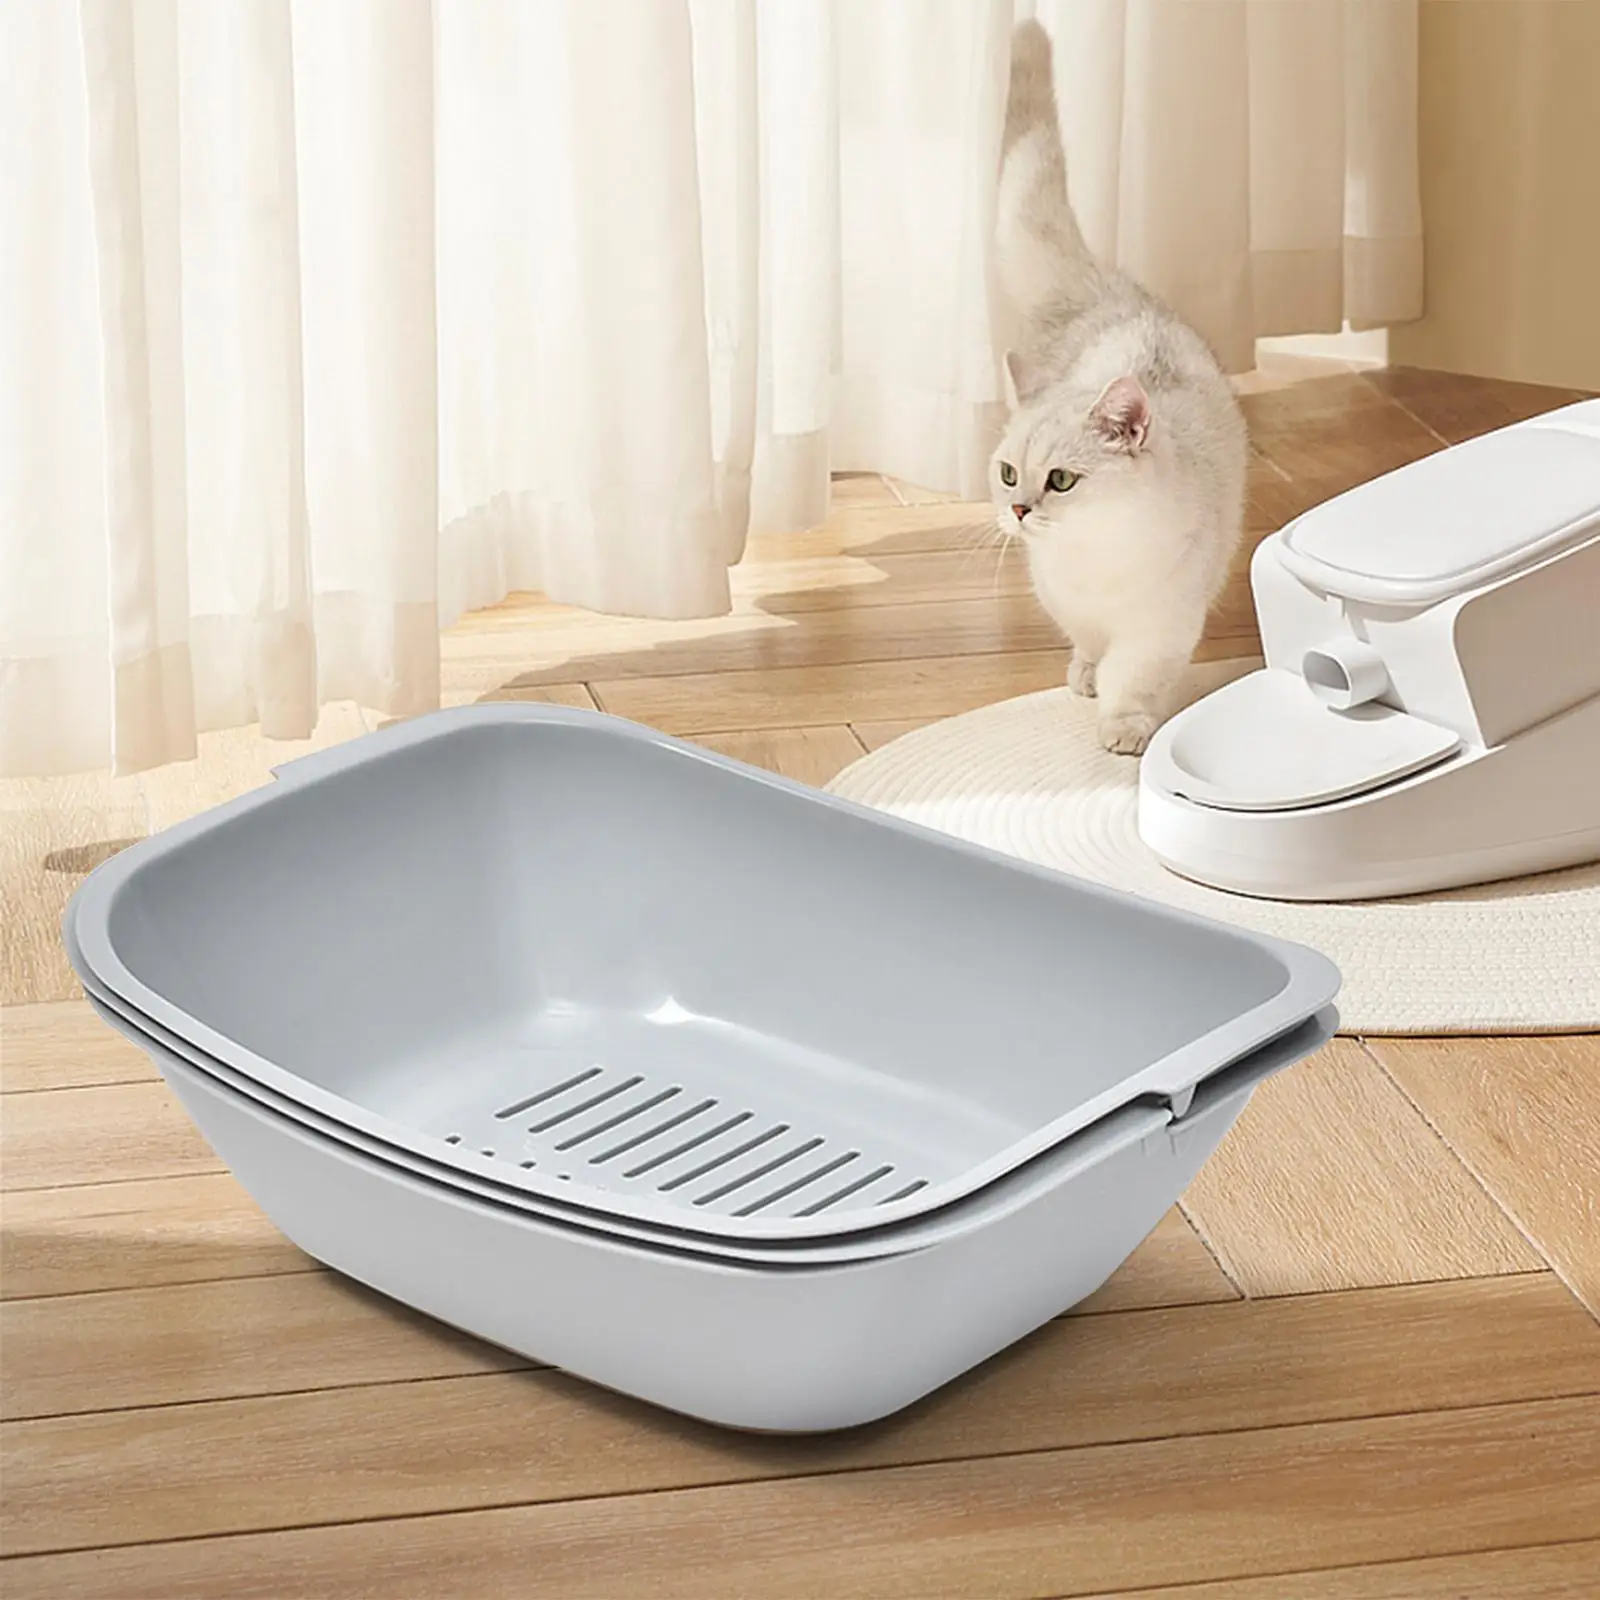 Open Cats Litter Box Potty Toilet for Small Animals Easy to Clean Bedpan Pet Sandbox Cat Litter Tray High Sides Pet Litter Pan